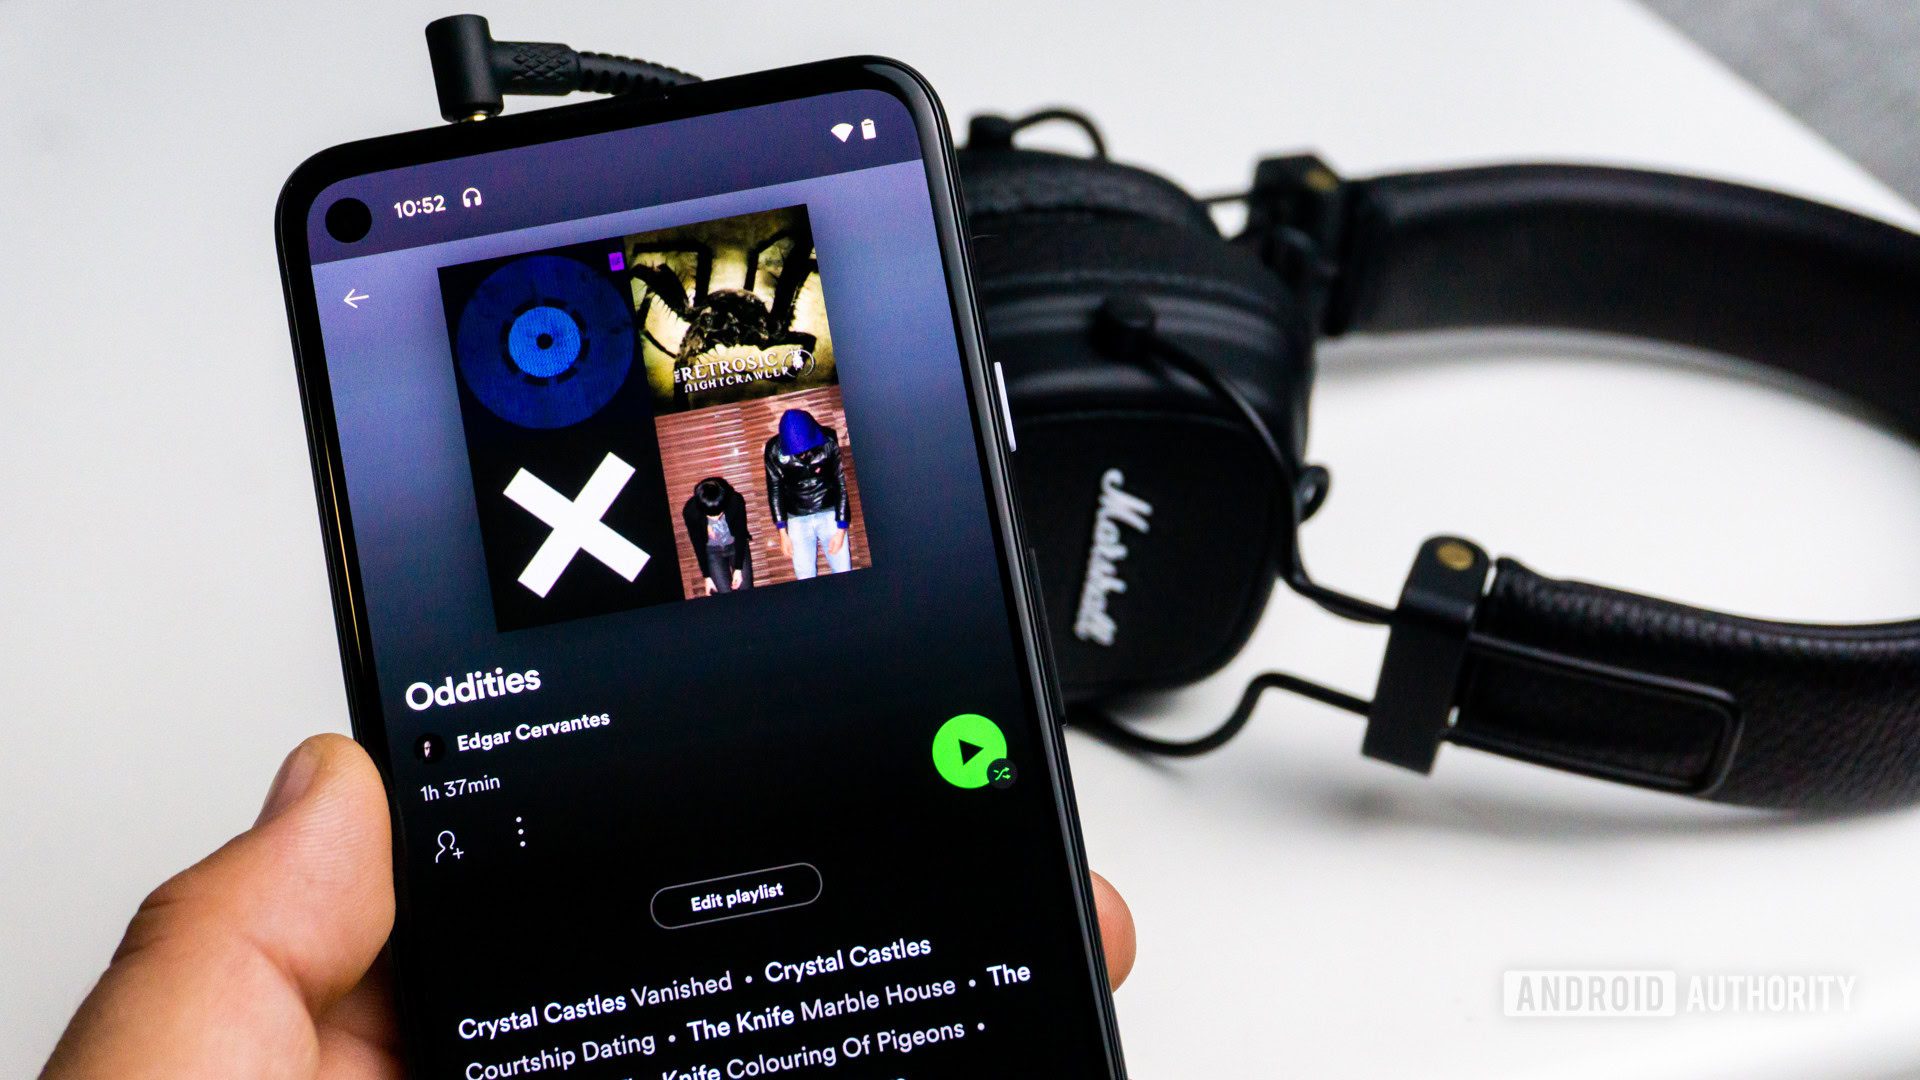 Spotify playlists have disappeared for many users